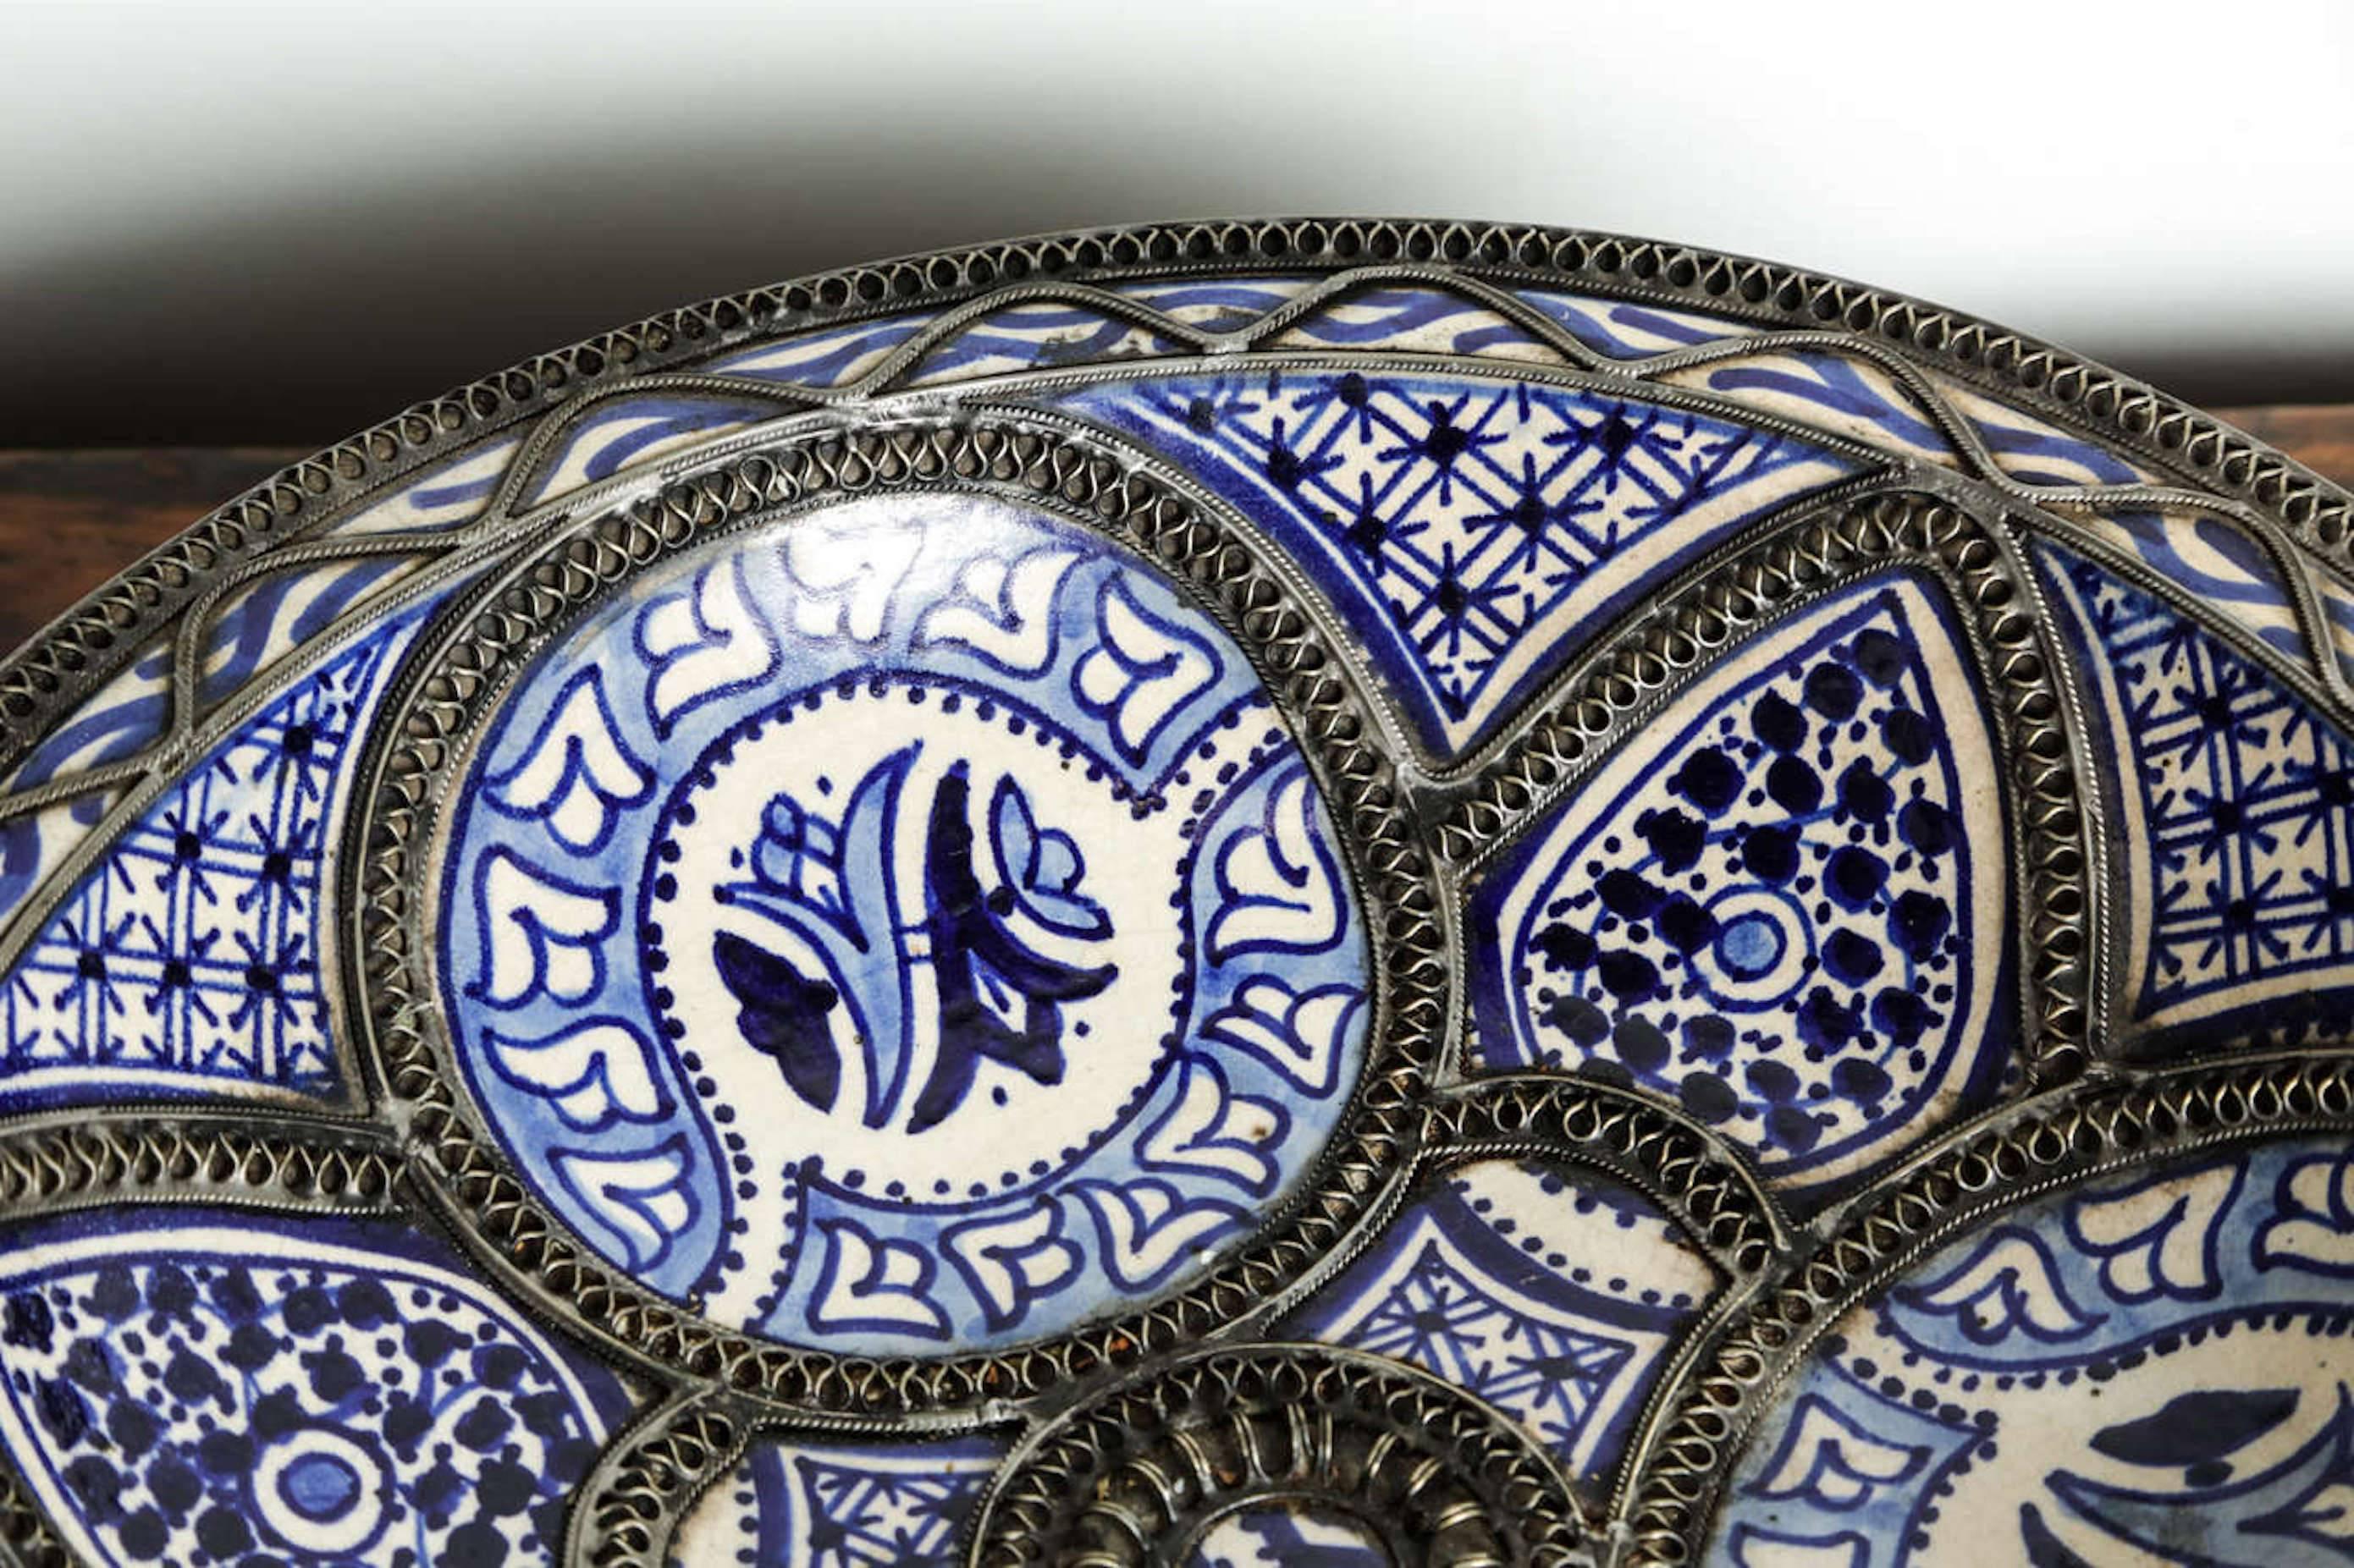 Hand-Crafted Moroccan Fez Ceramic Plate in Blue and White Adorned with Filigree